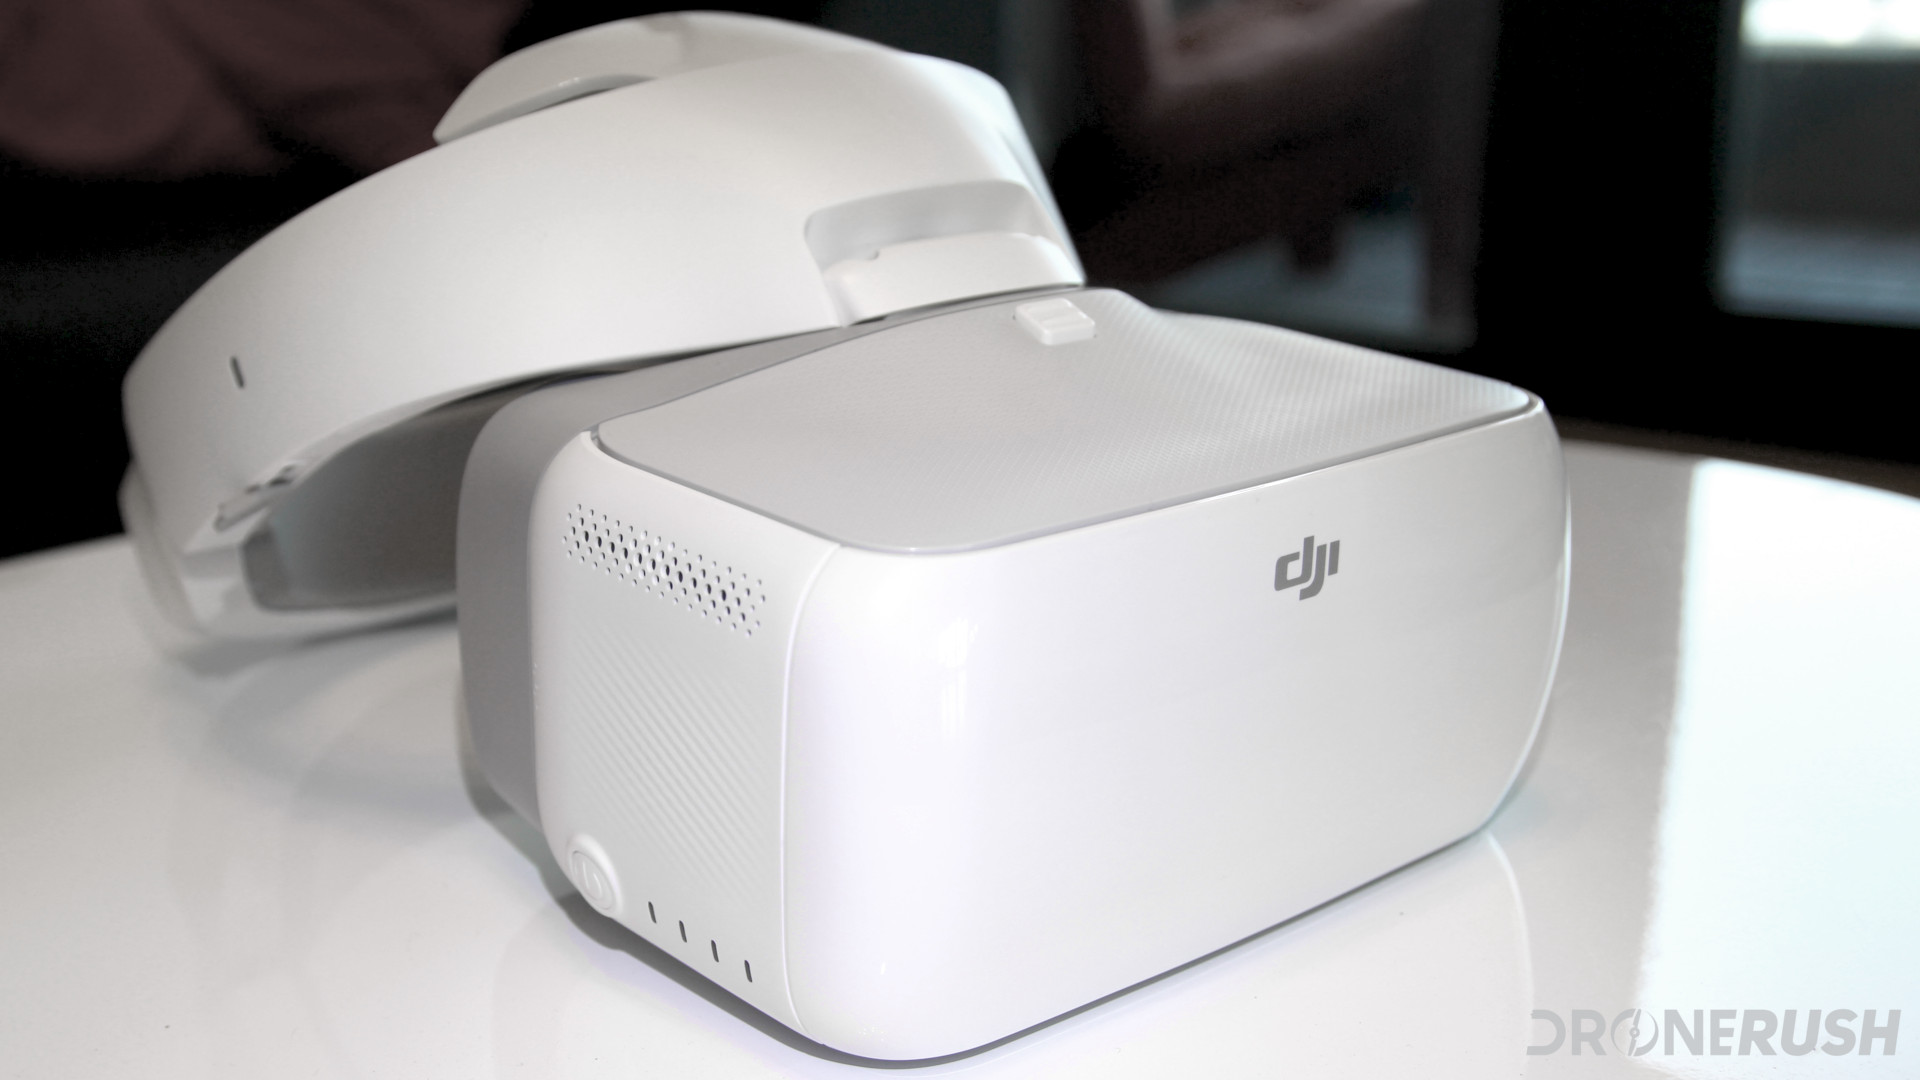 laundry Deter myself DJI Goggles and the Mavic Pro - a clever VR headset - Drone Rush